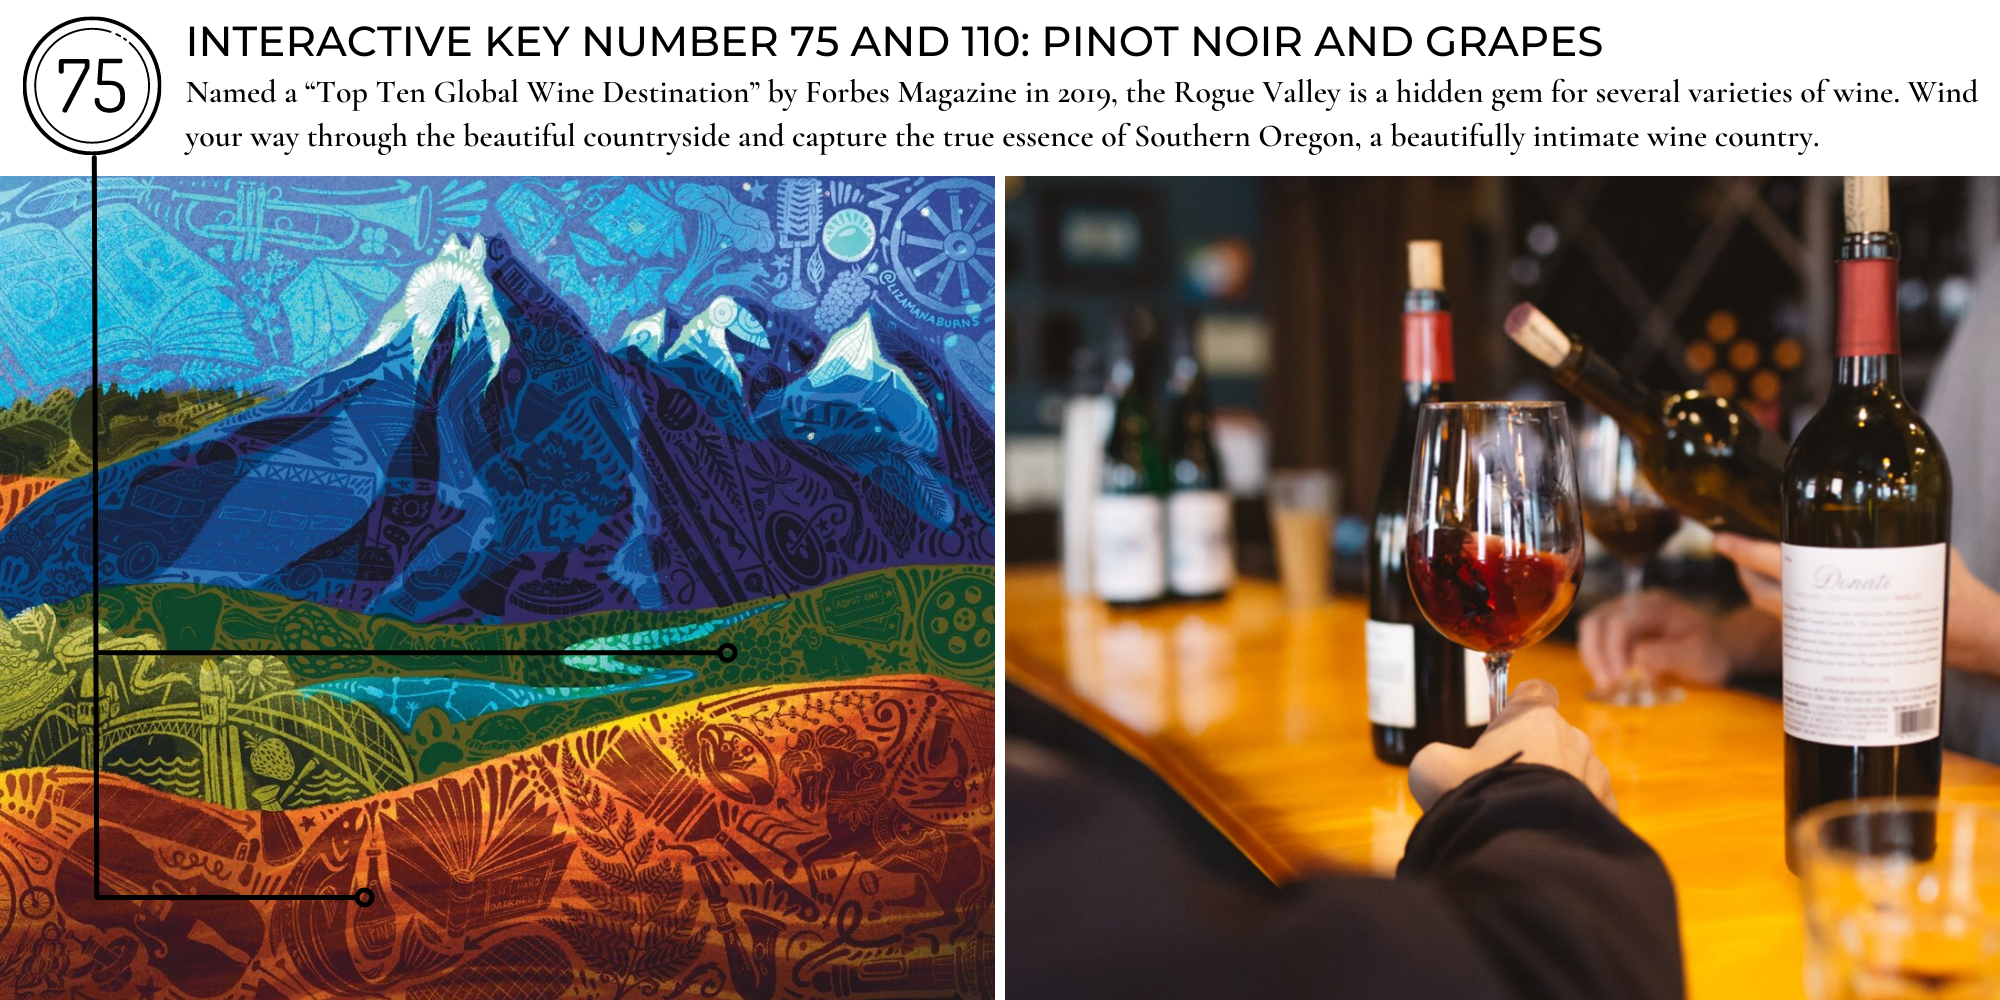 Celebrate Oregon! , Cultural trust mural, medford murals, airport mural, artistry, oregon cultural trust, interactive key number, photo, pinot noir, grapes, wine country